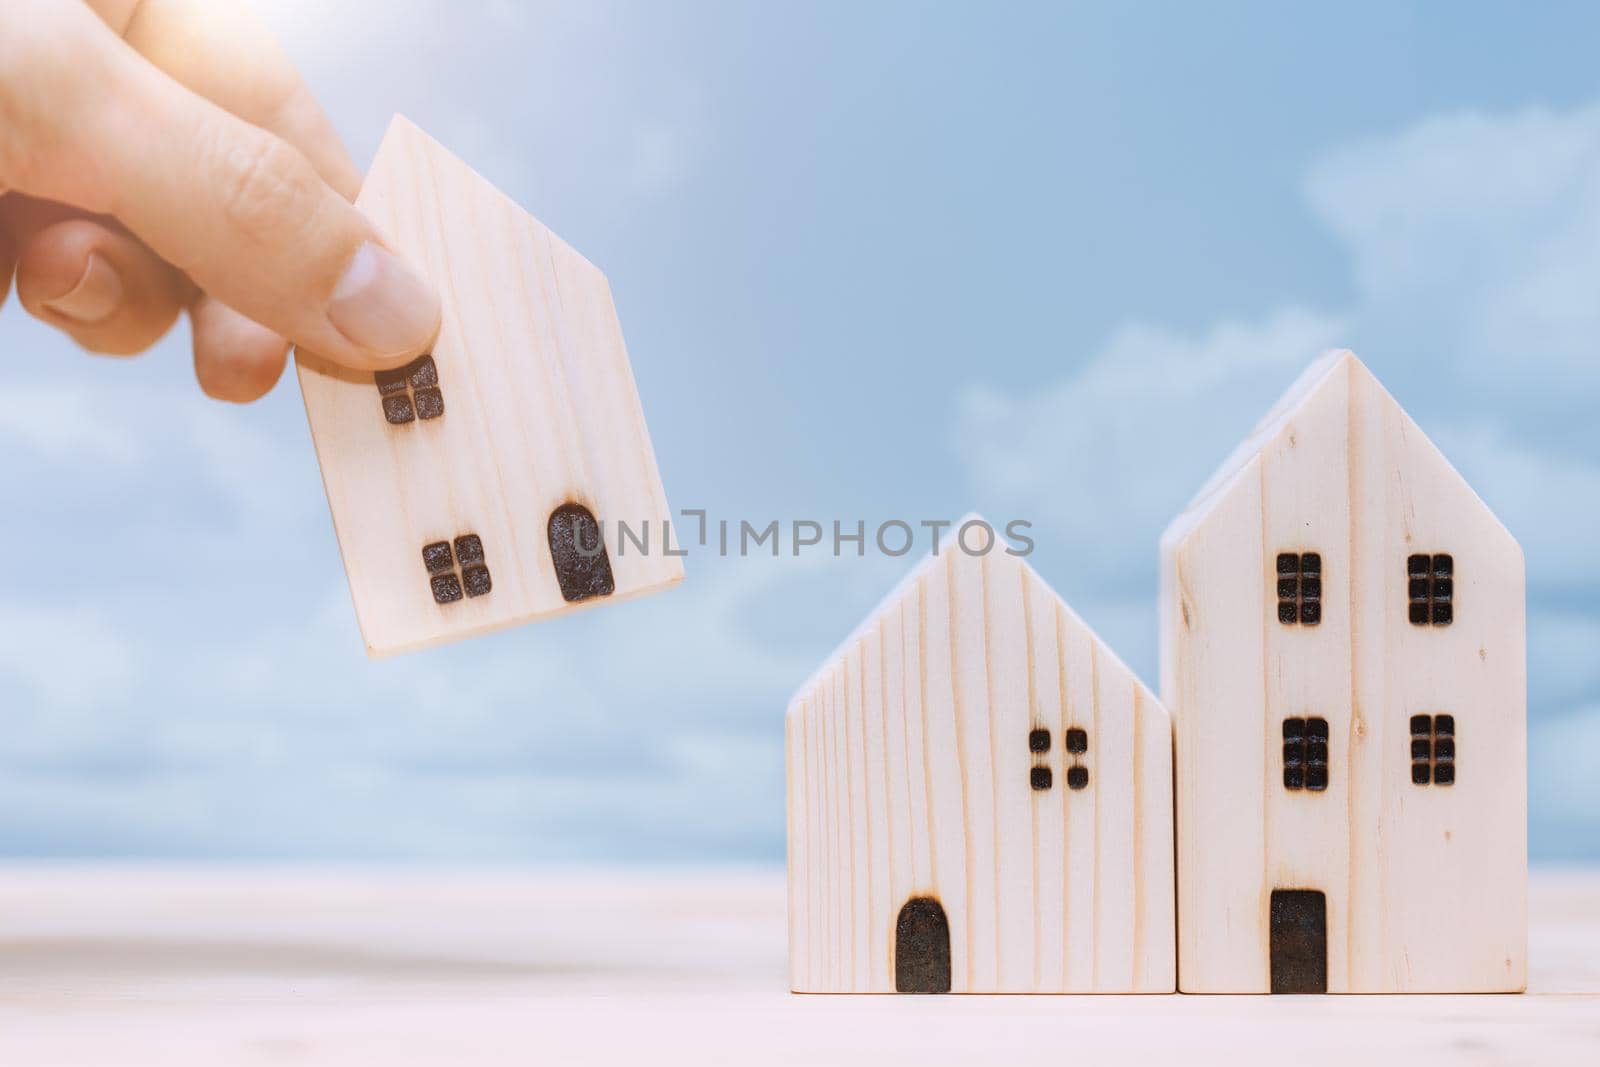 Hand placed or move home model for relocate or moving house concept.